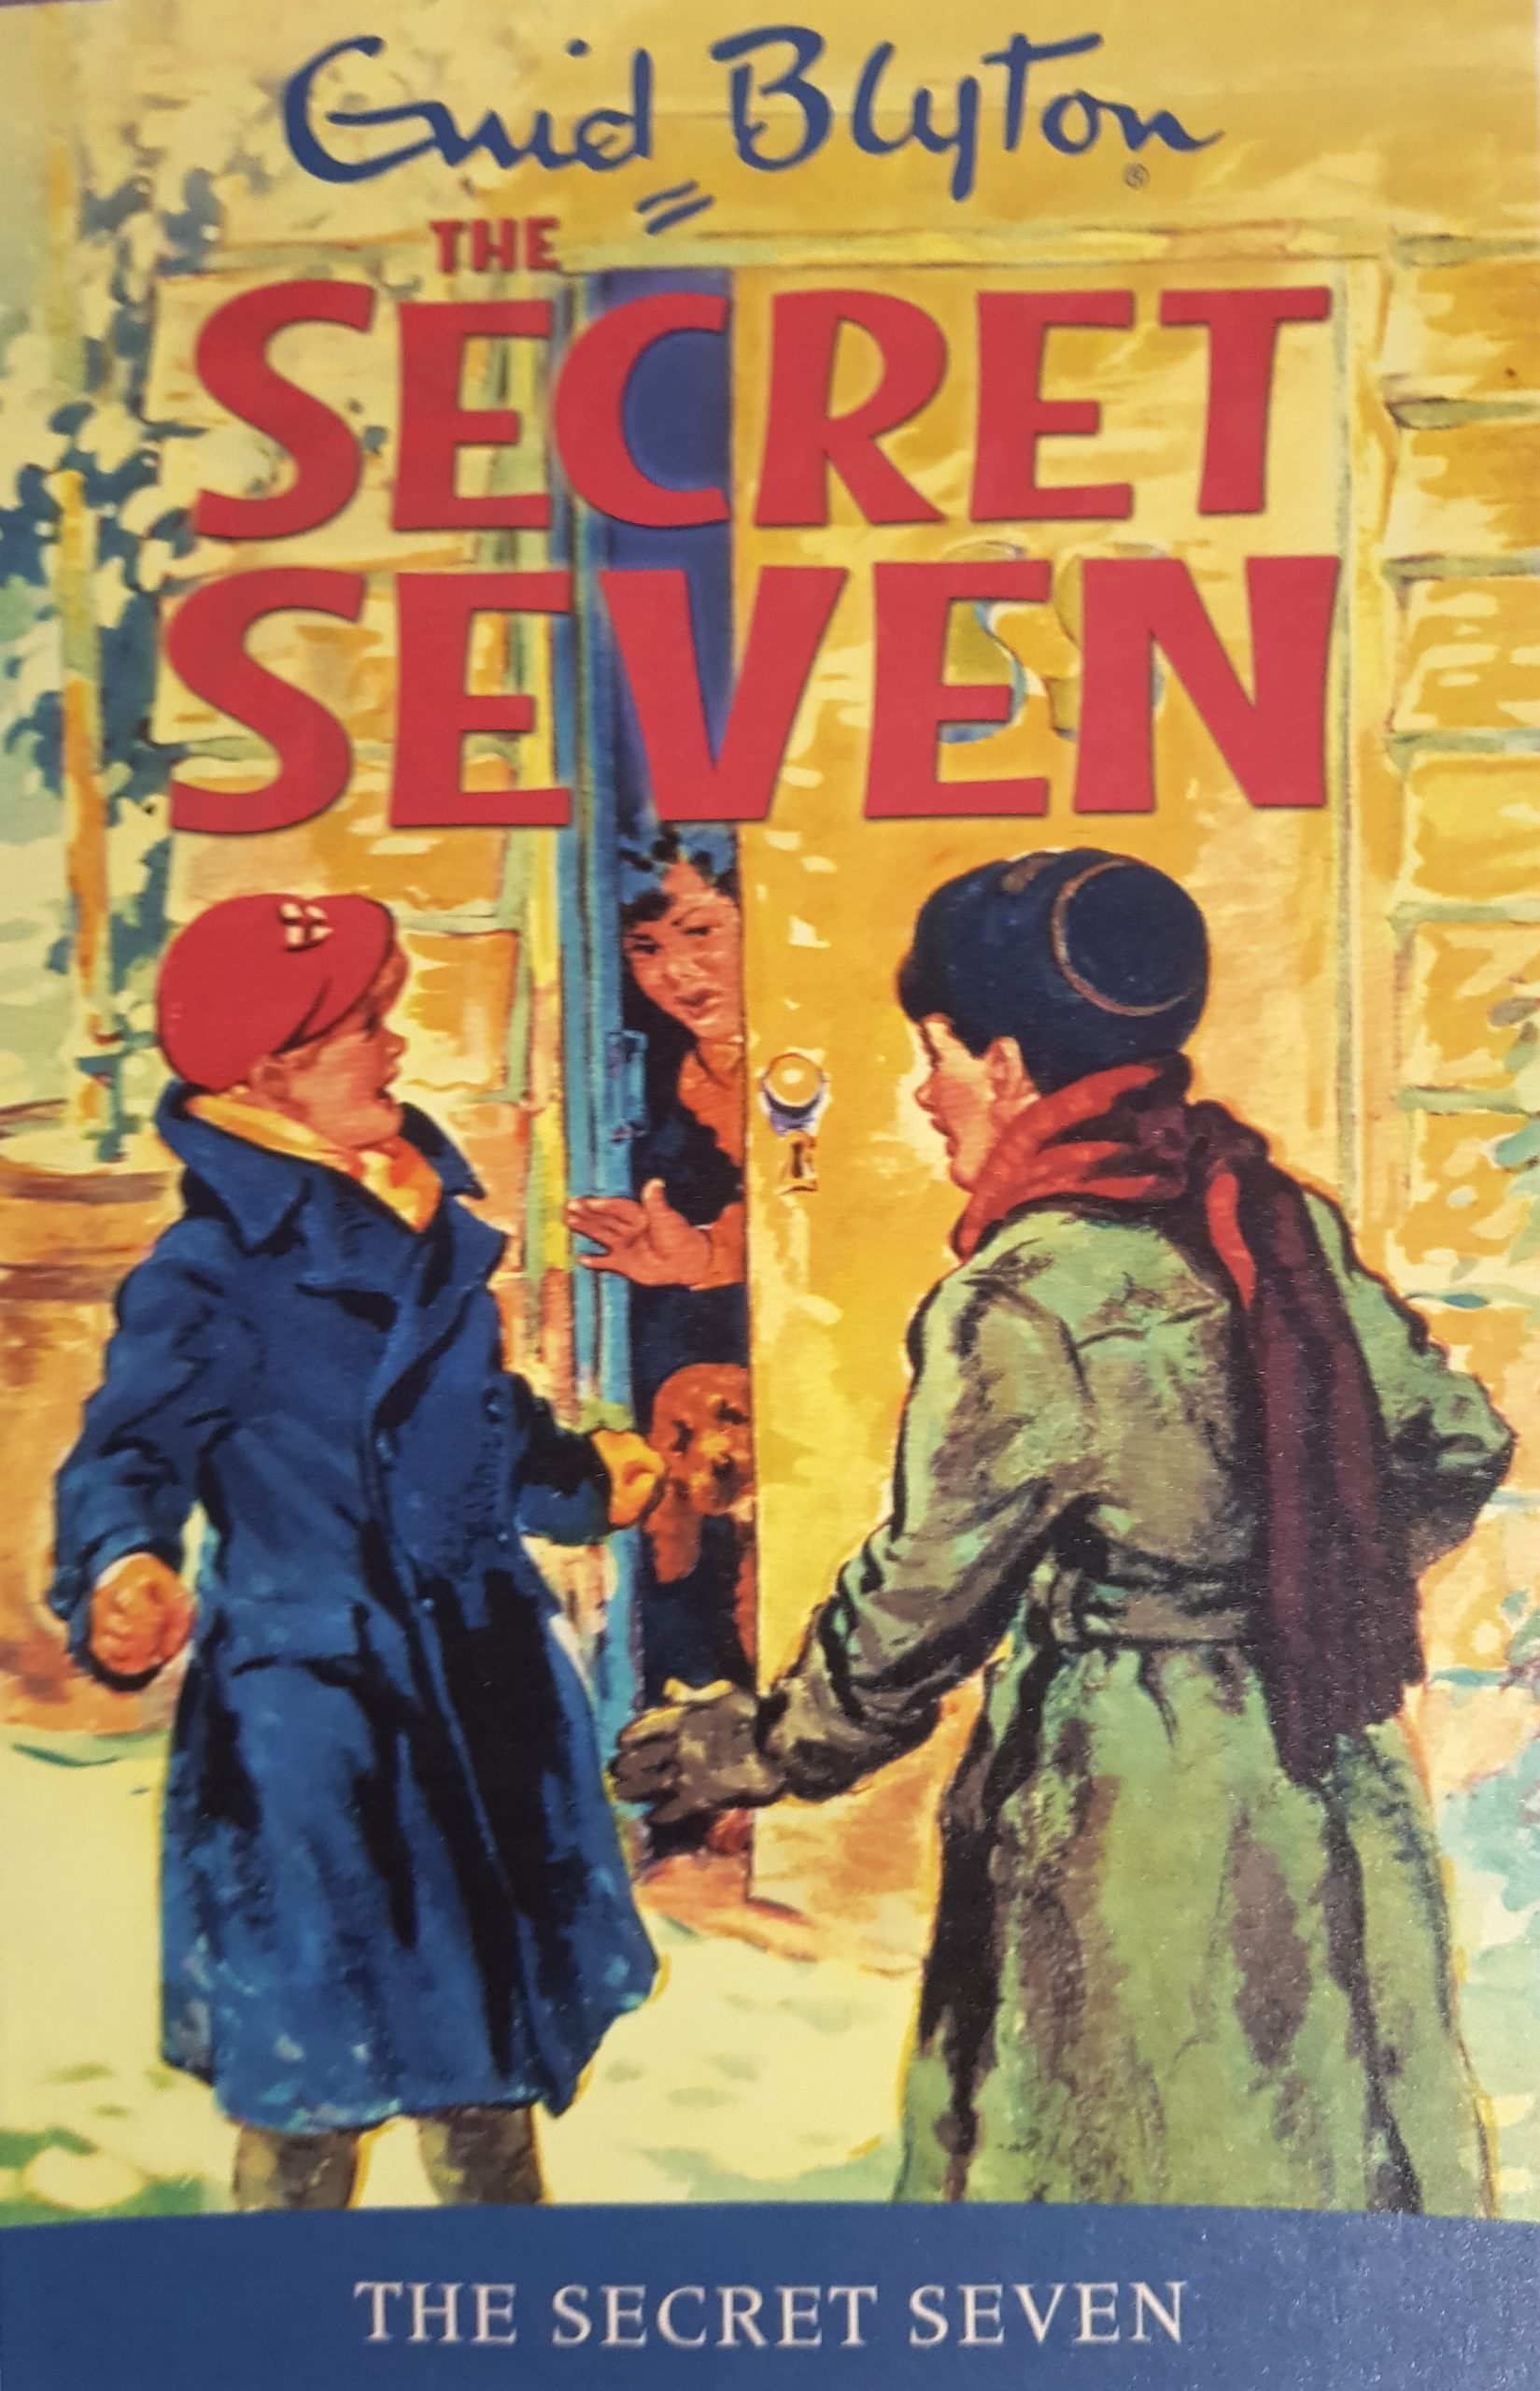 book review of the secret seven